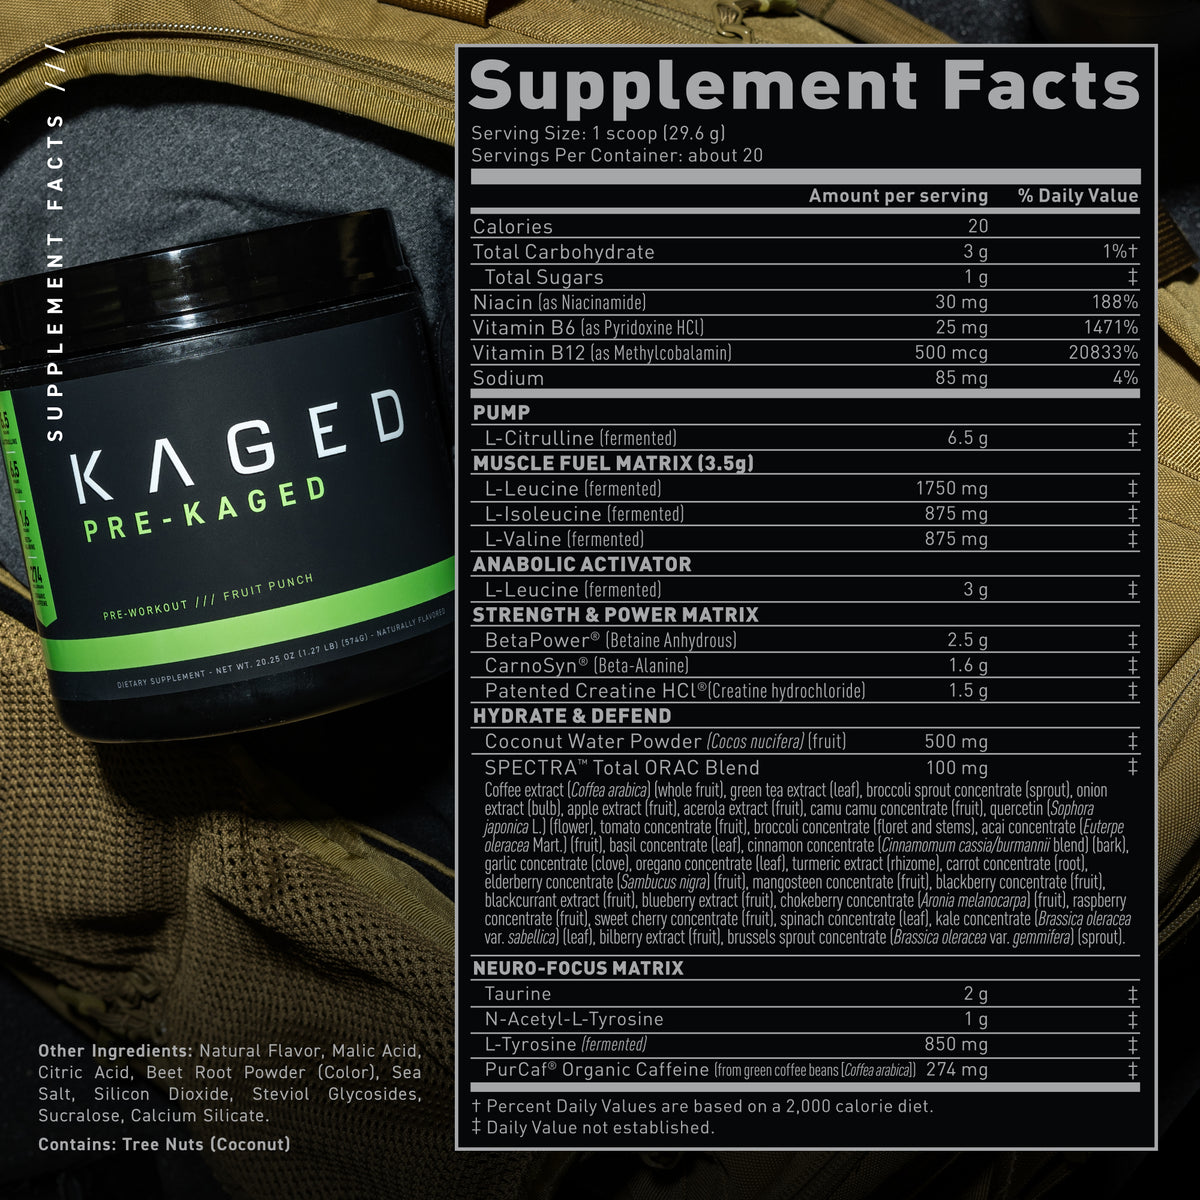 Top 12 Pre Workout Supplements In Australia (Ranked By Price